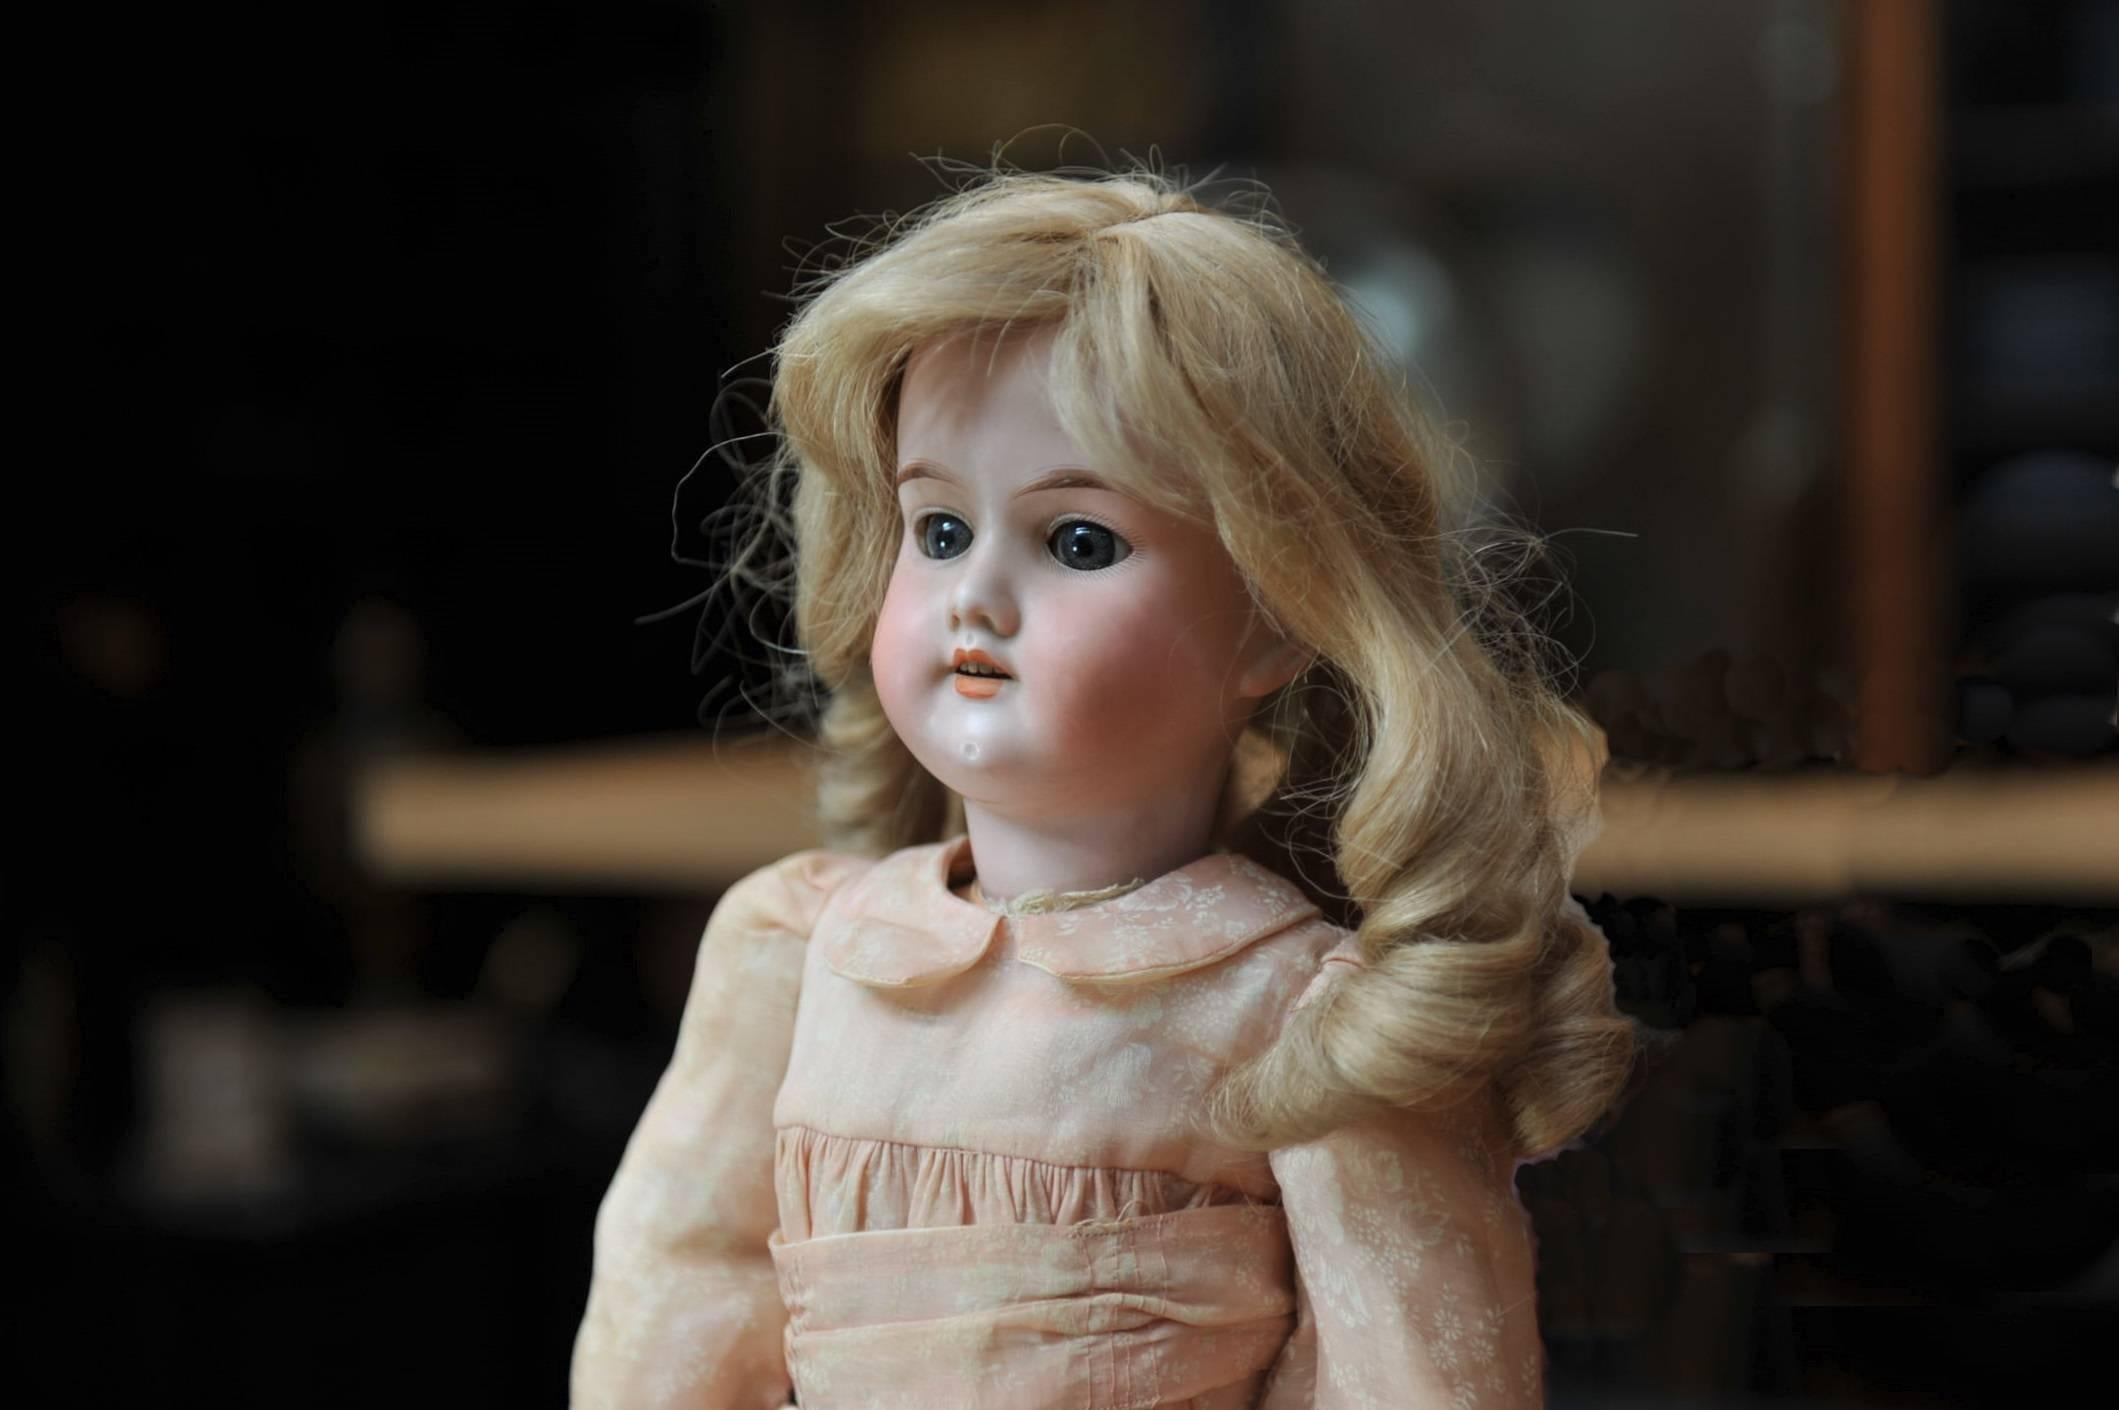 Rare original antique Armand Marseille bisque porcelain doll large size 390. Her big blue glass eyes work perfectly. Open mouth revealing 4 porcelain white upper teeth, original Blonde curly wig, her beautiful bisque head is free of any damage, no